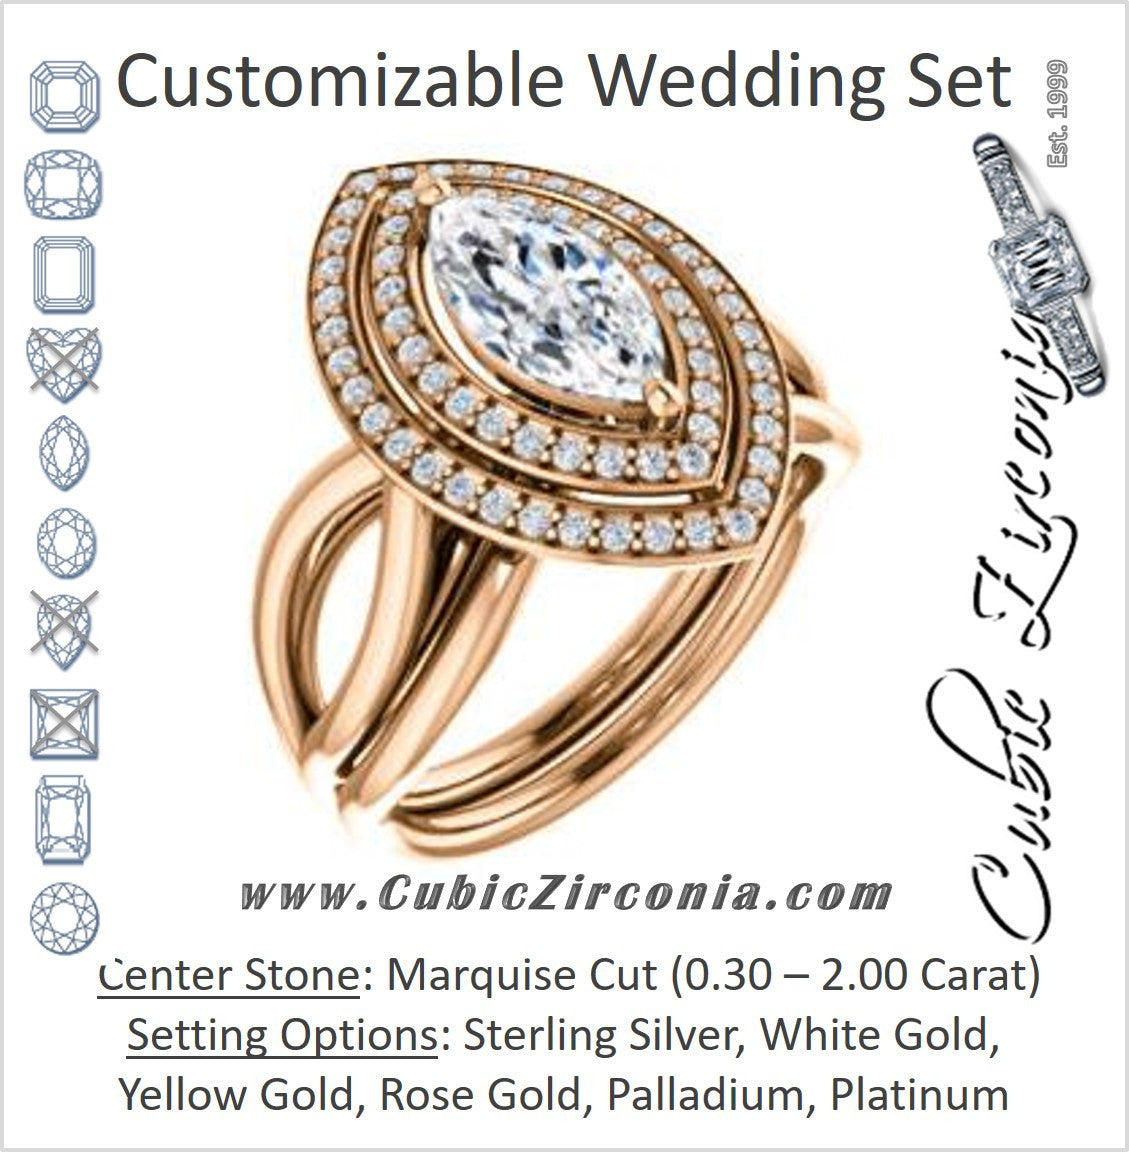 CZ Wedding Set, featuring The Magda Lesli engagement ring (Customizable Double-Halo Style Marquise Cut with Curving Split Band)